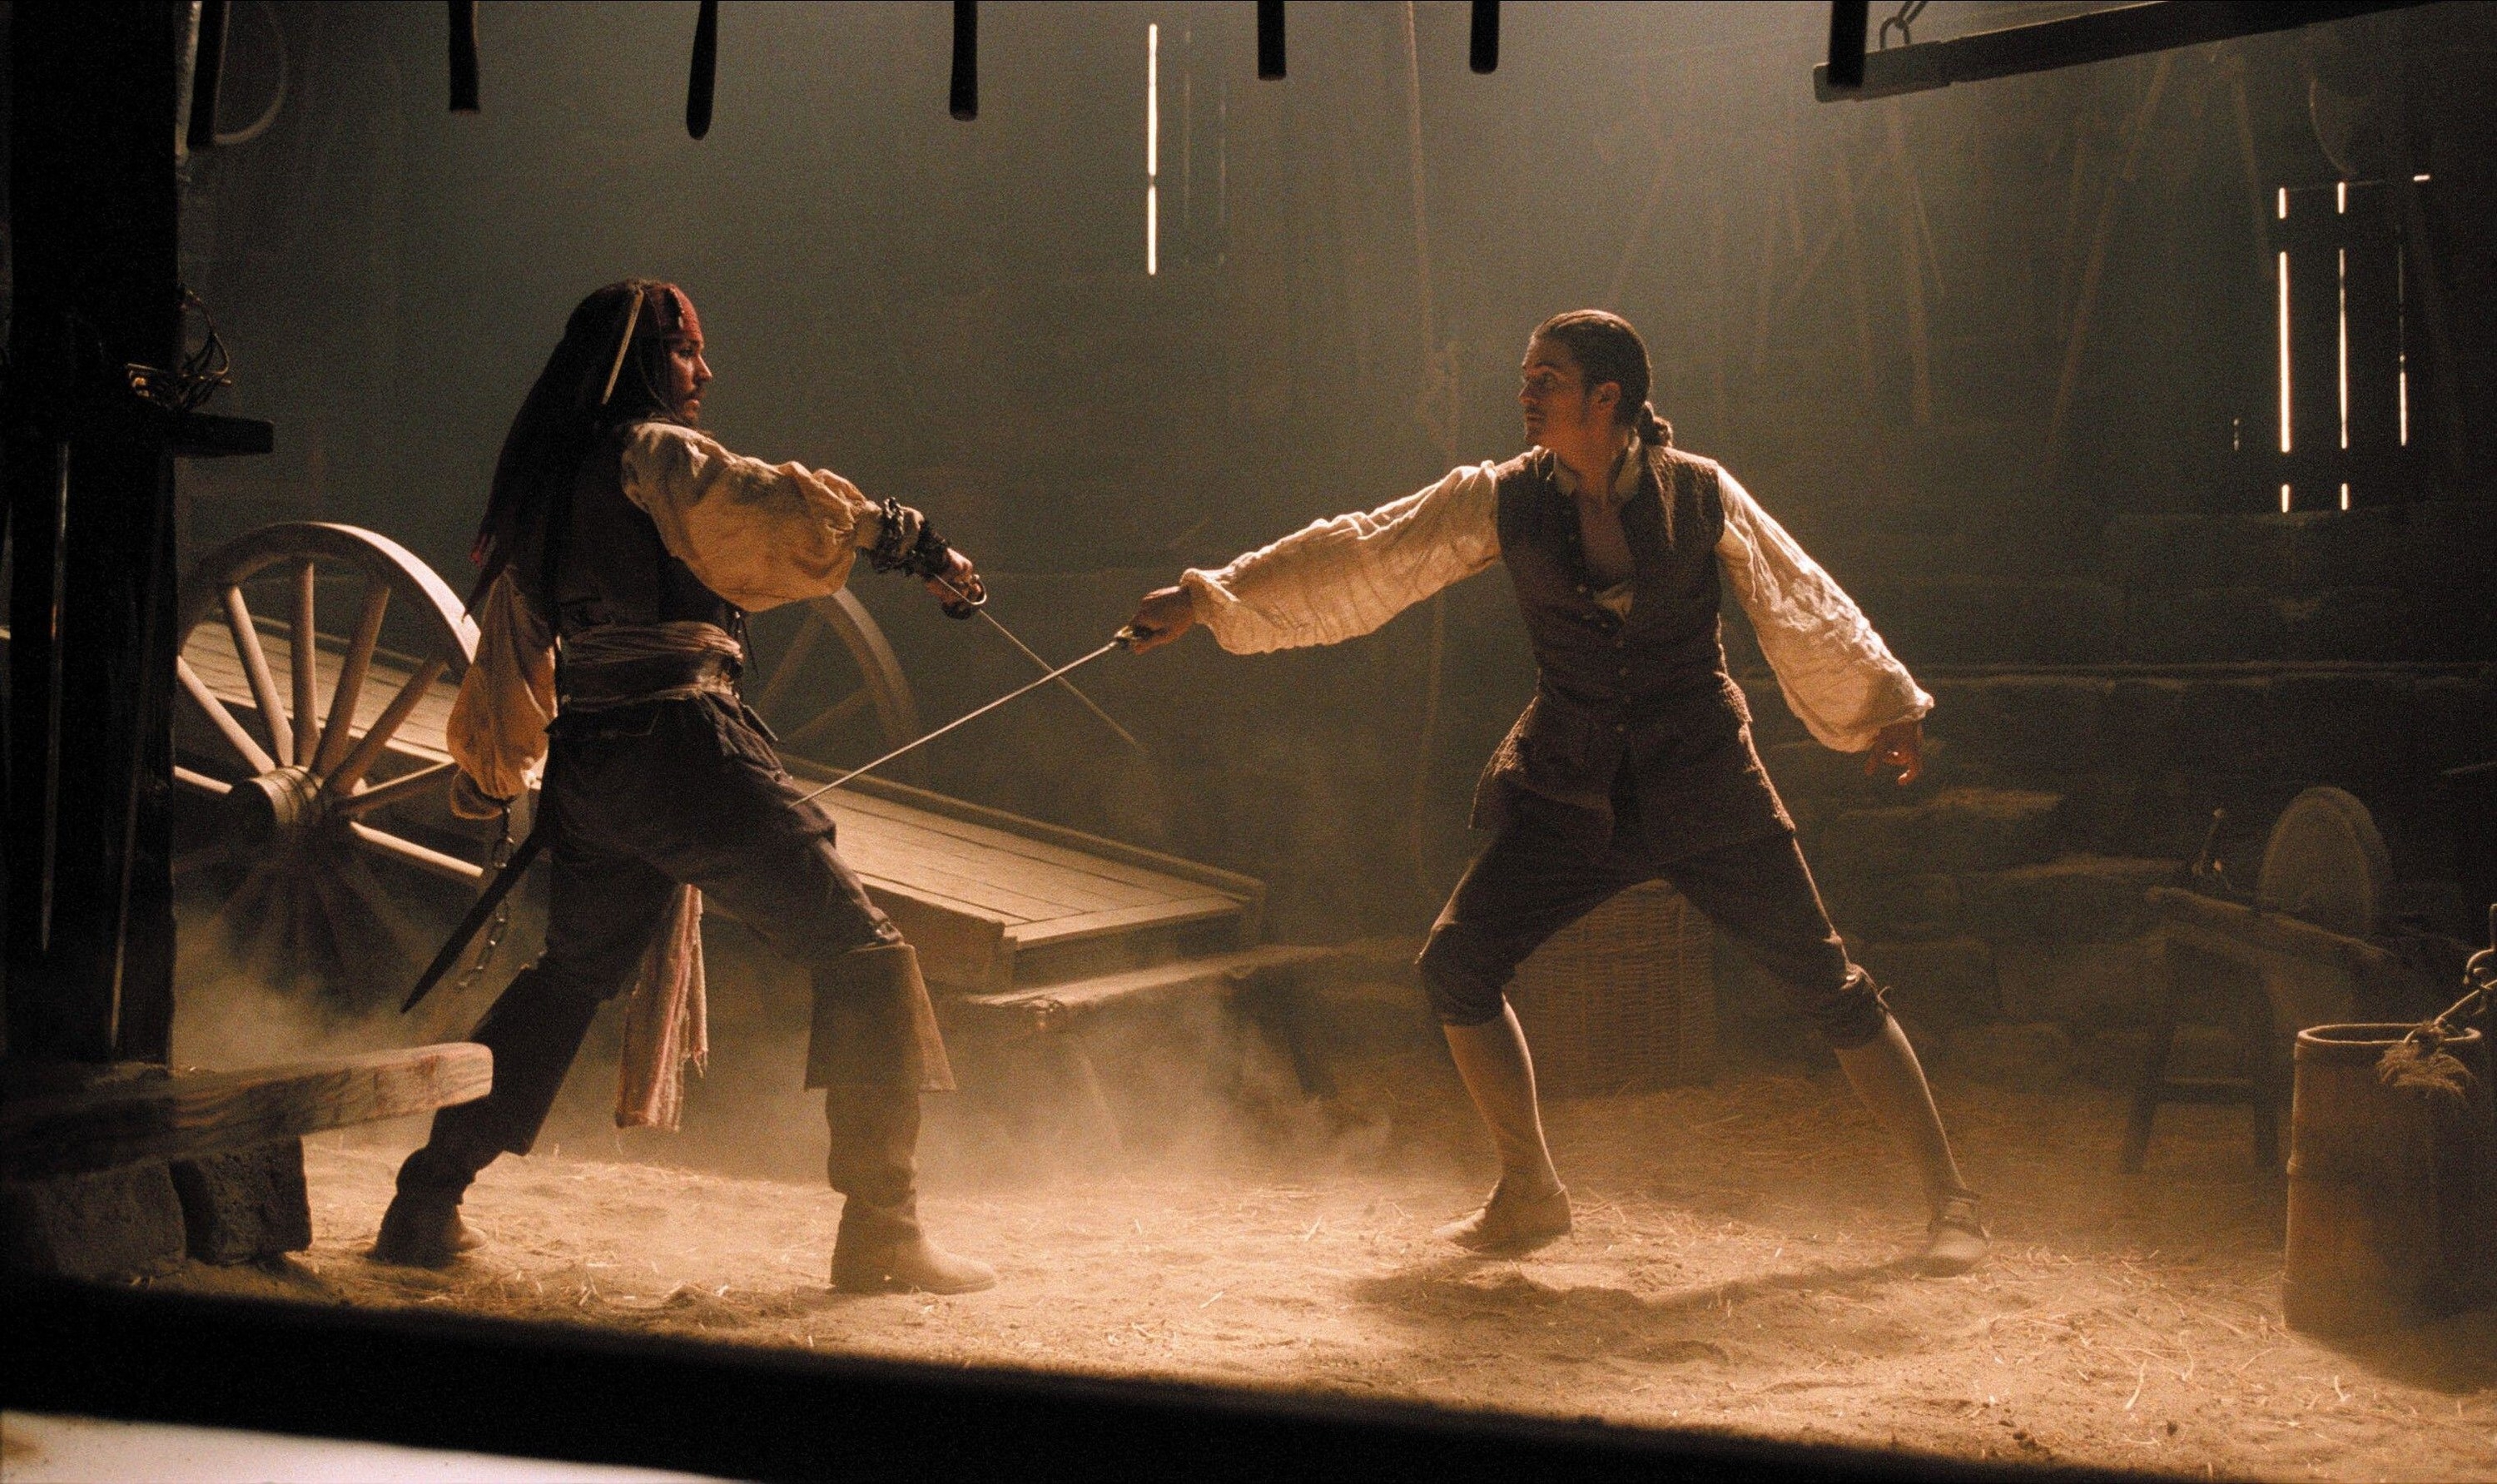 Two pirates have a swordfight in an old barn